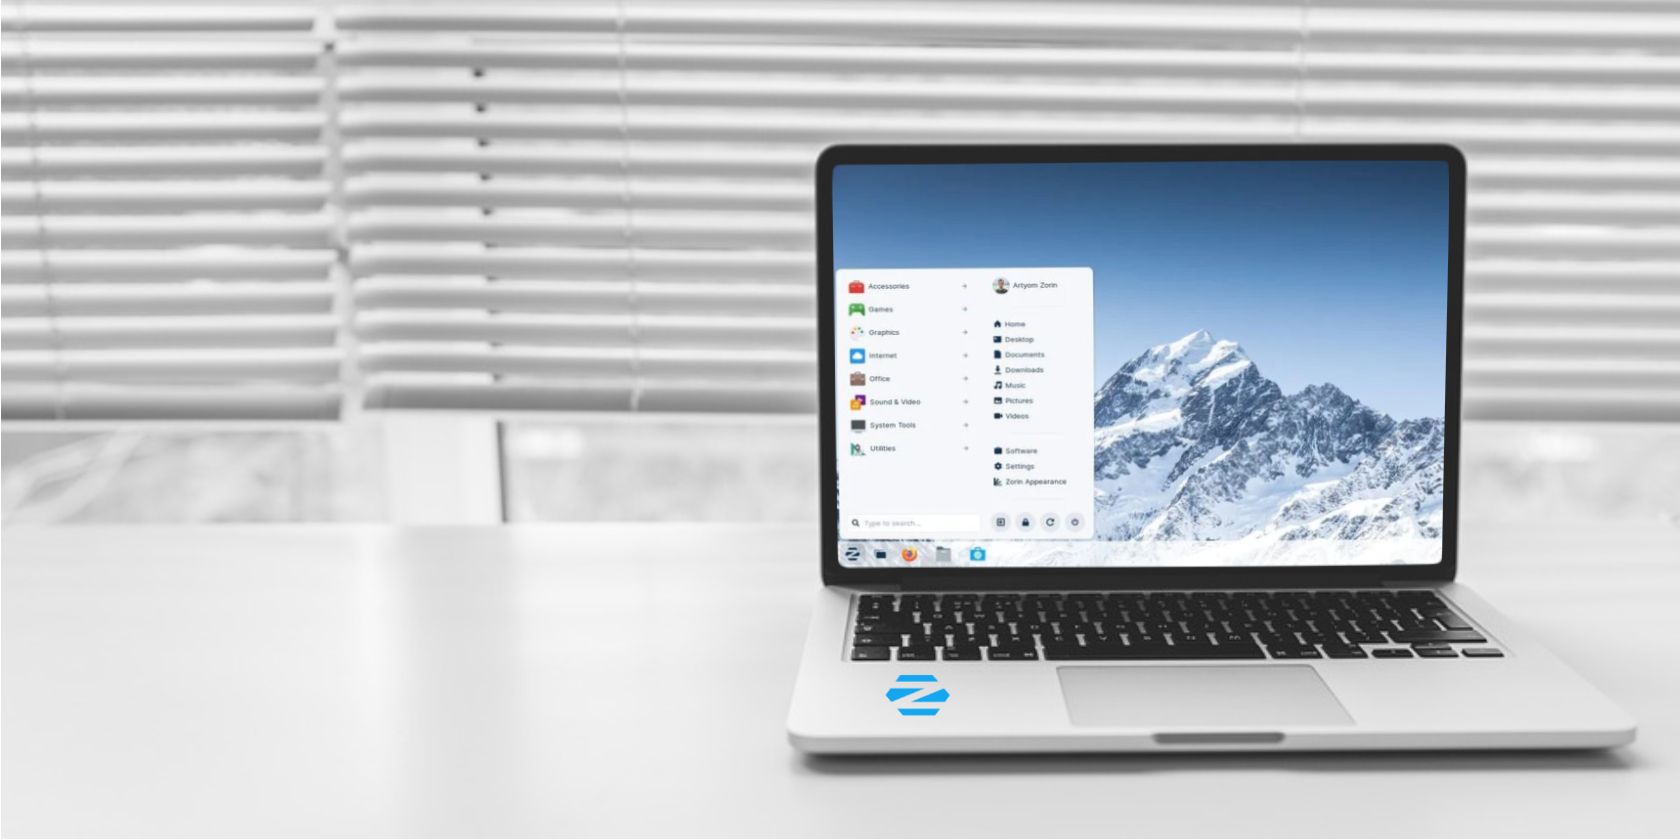 new version of zorin os released